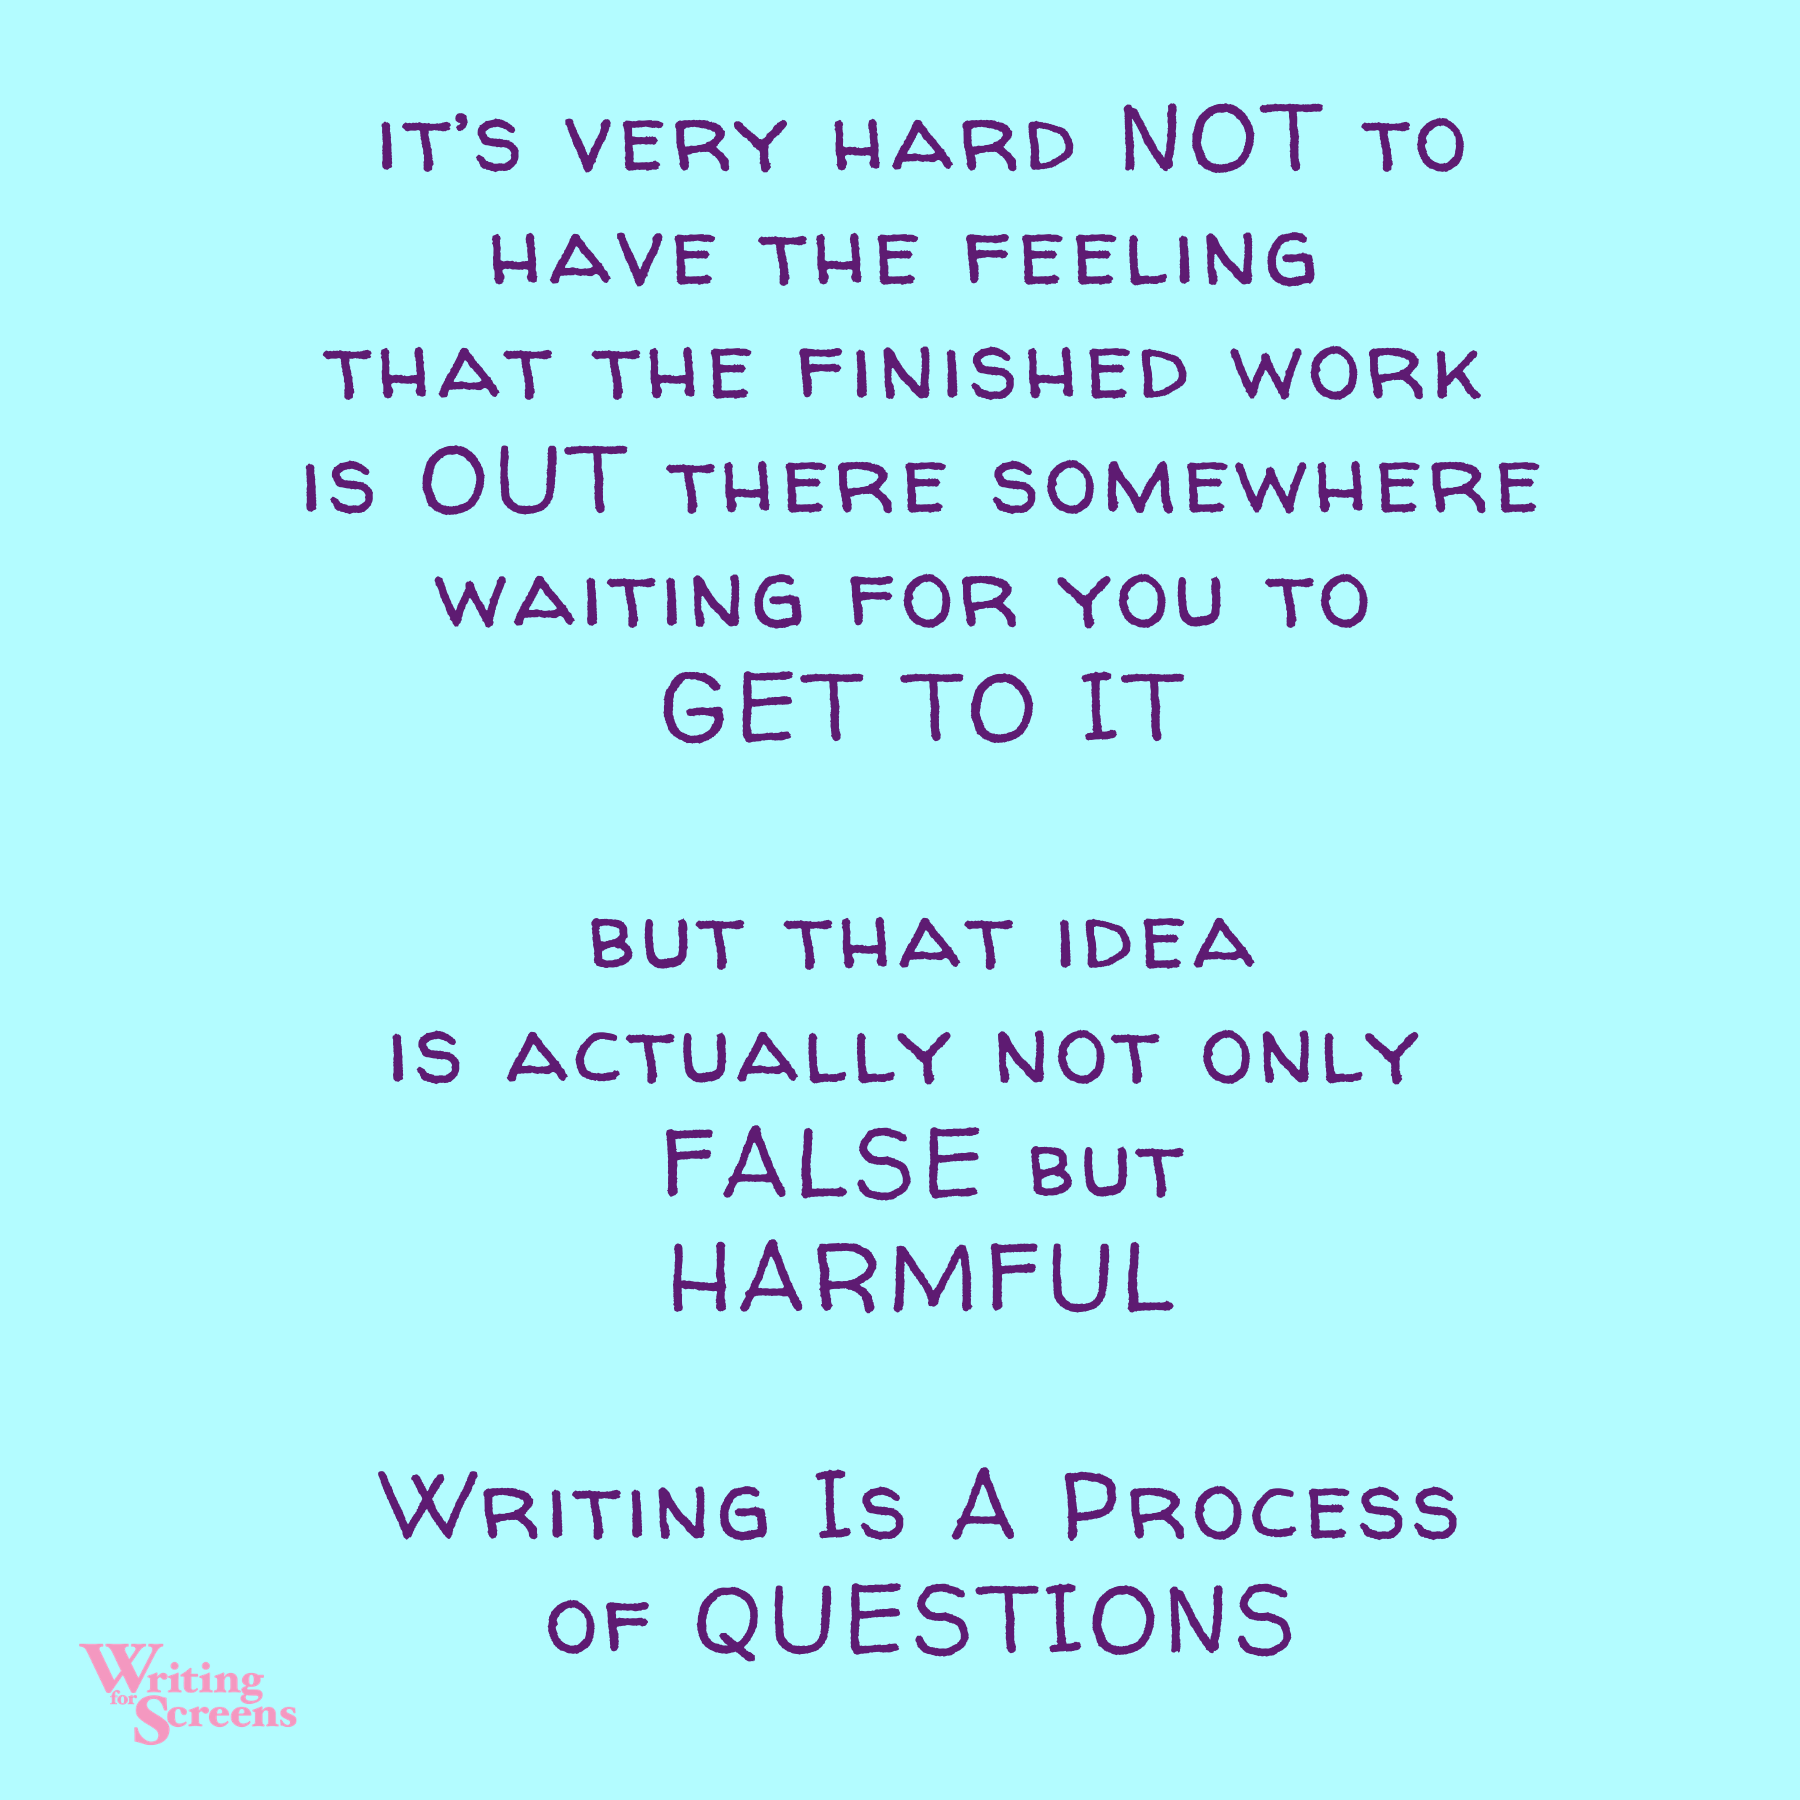 Writing Is A Process Of Questions - Writing for Screens